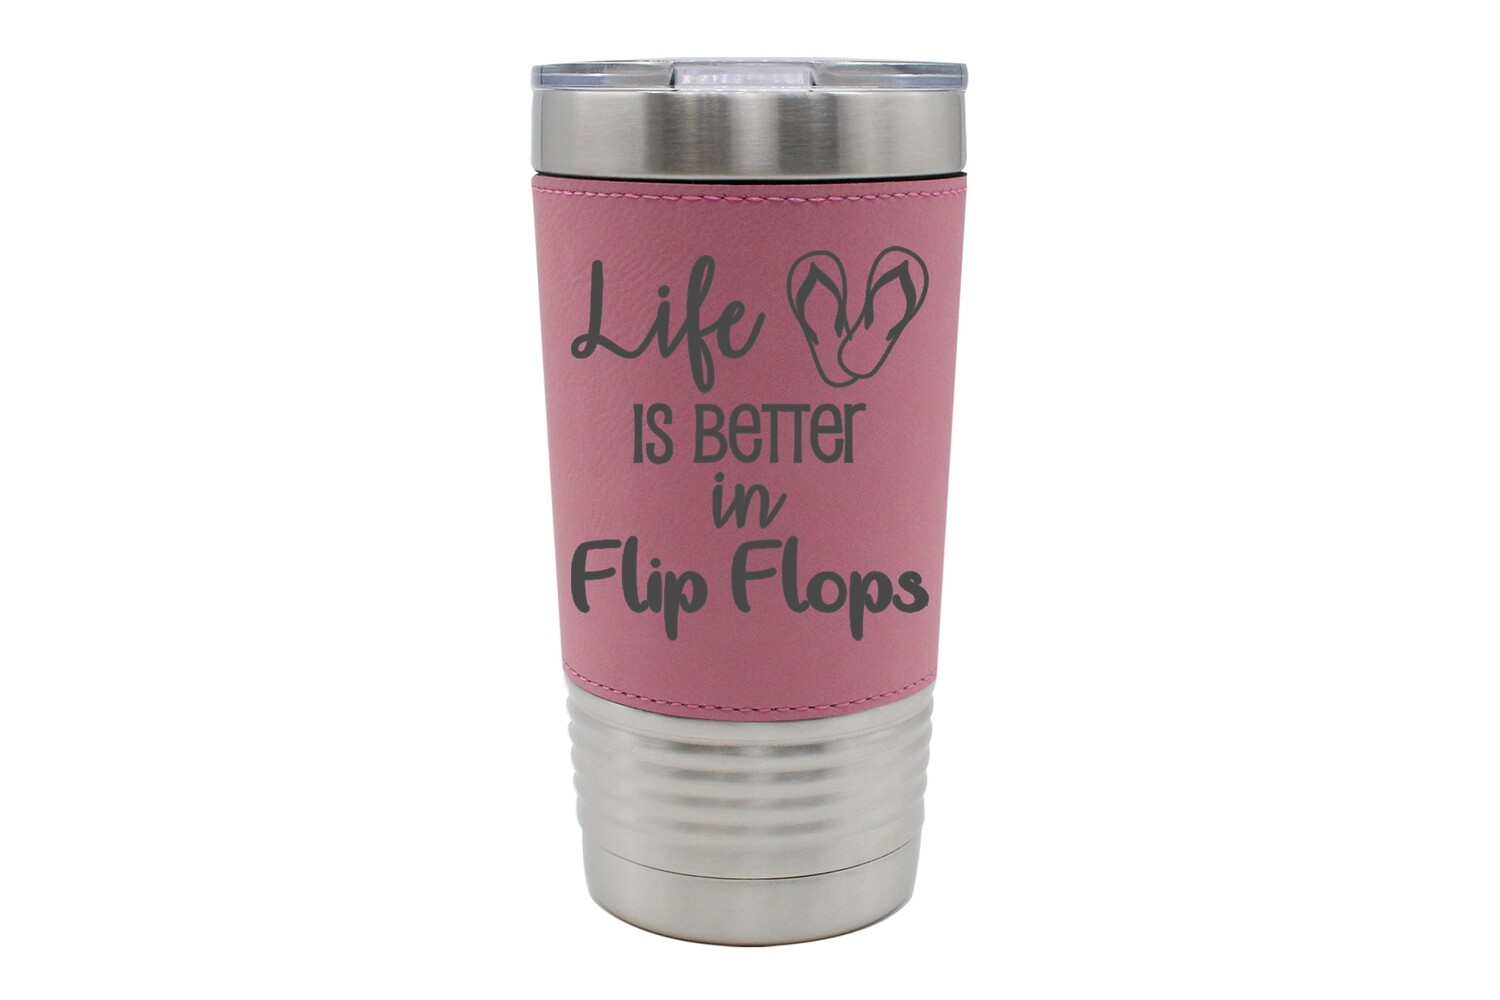 Leatherette 20 oz "Life is Better in Flip Flops" Insulated Tumbler